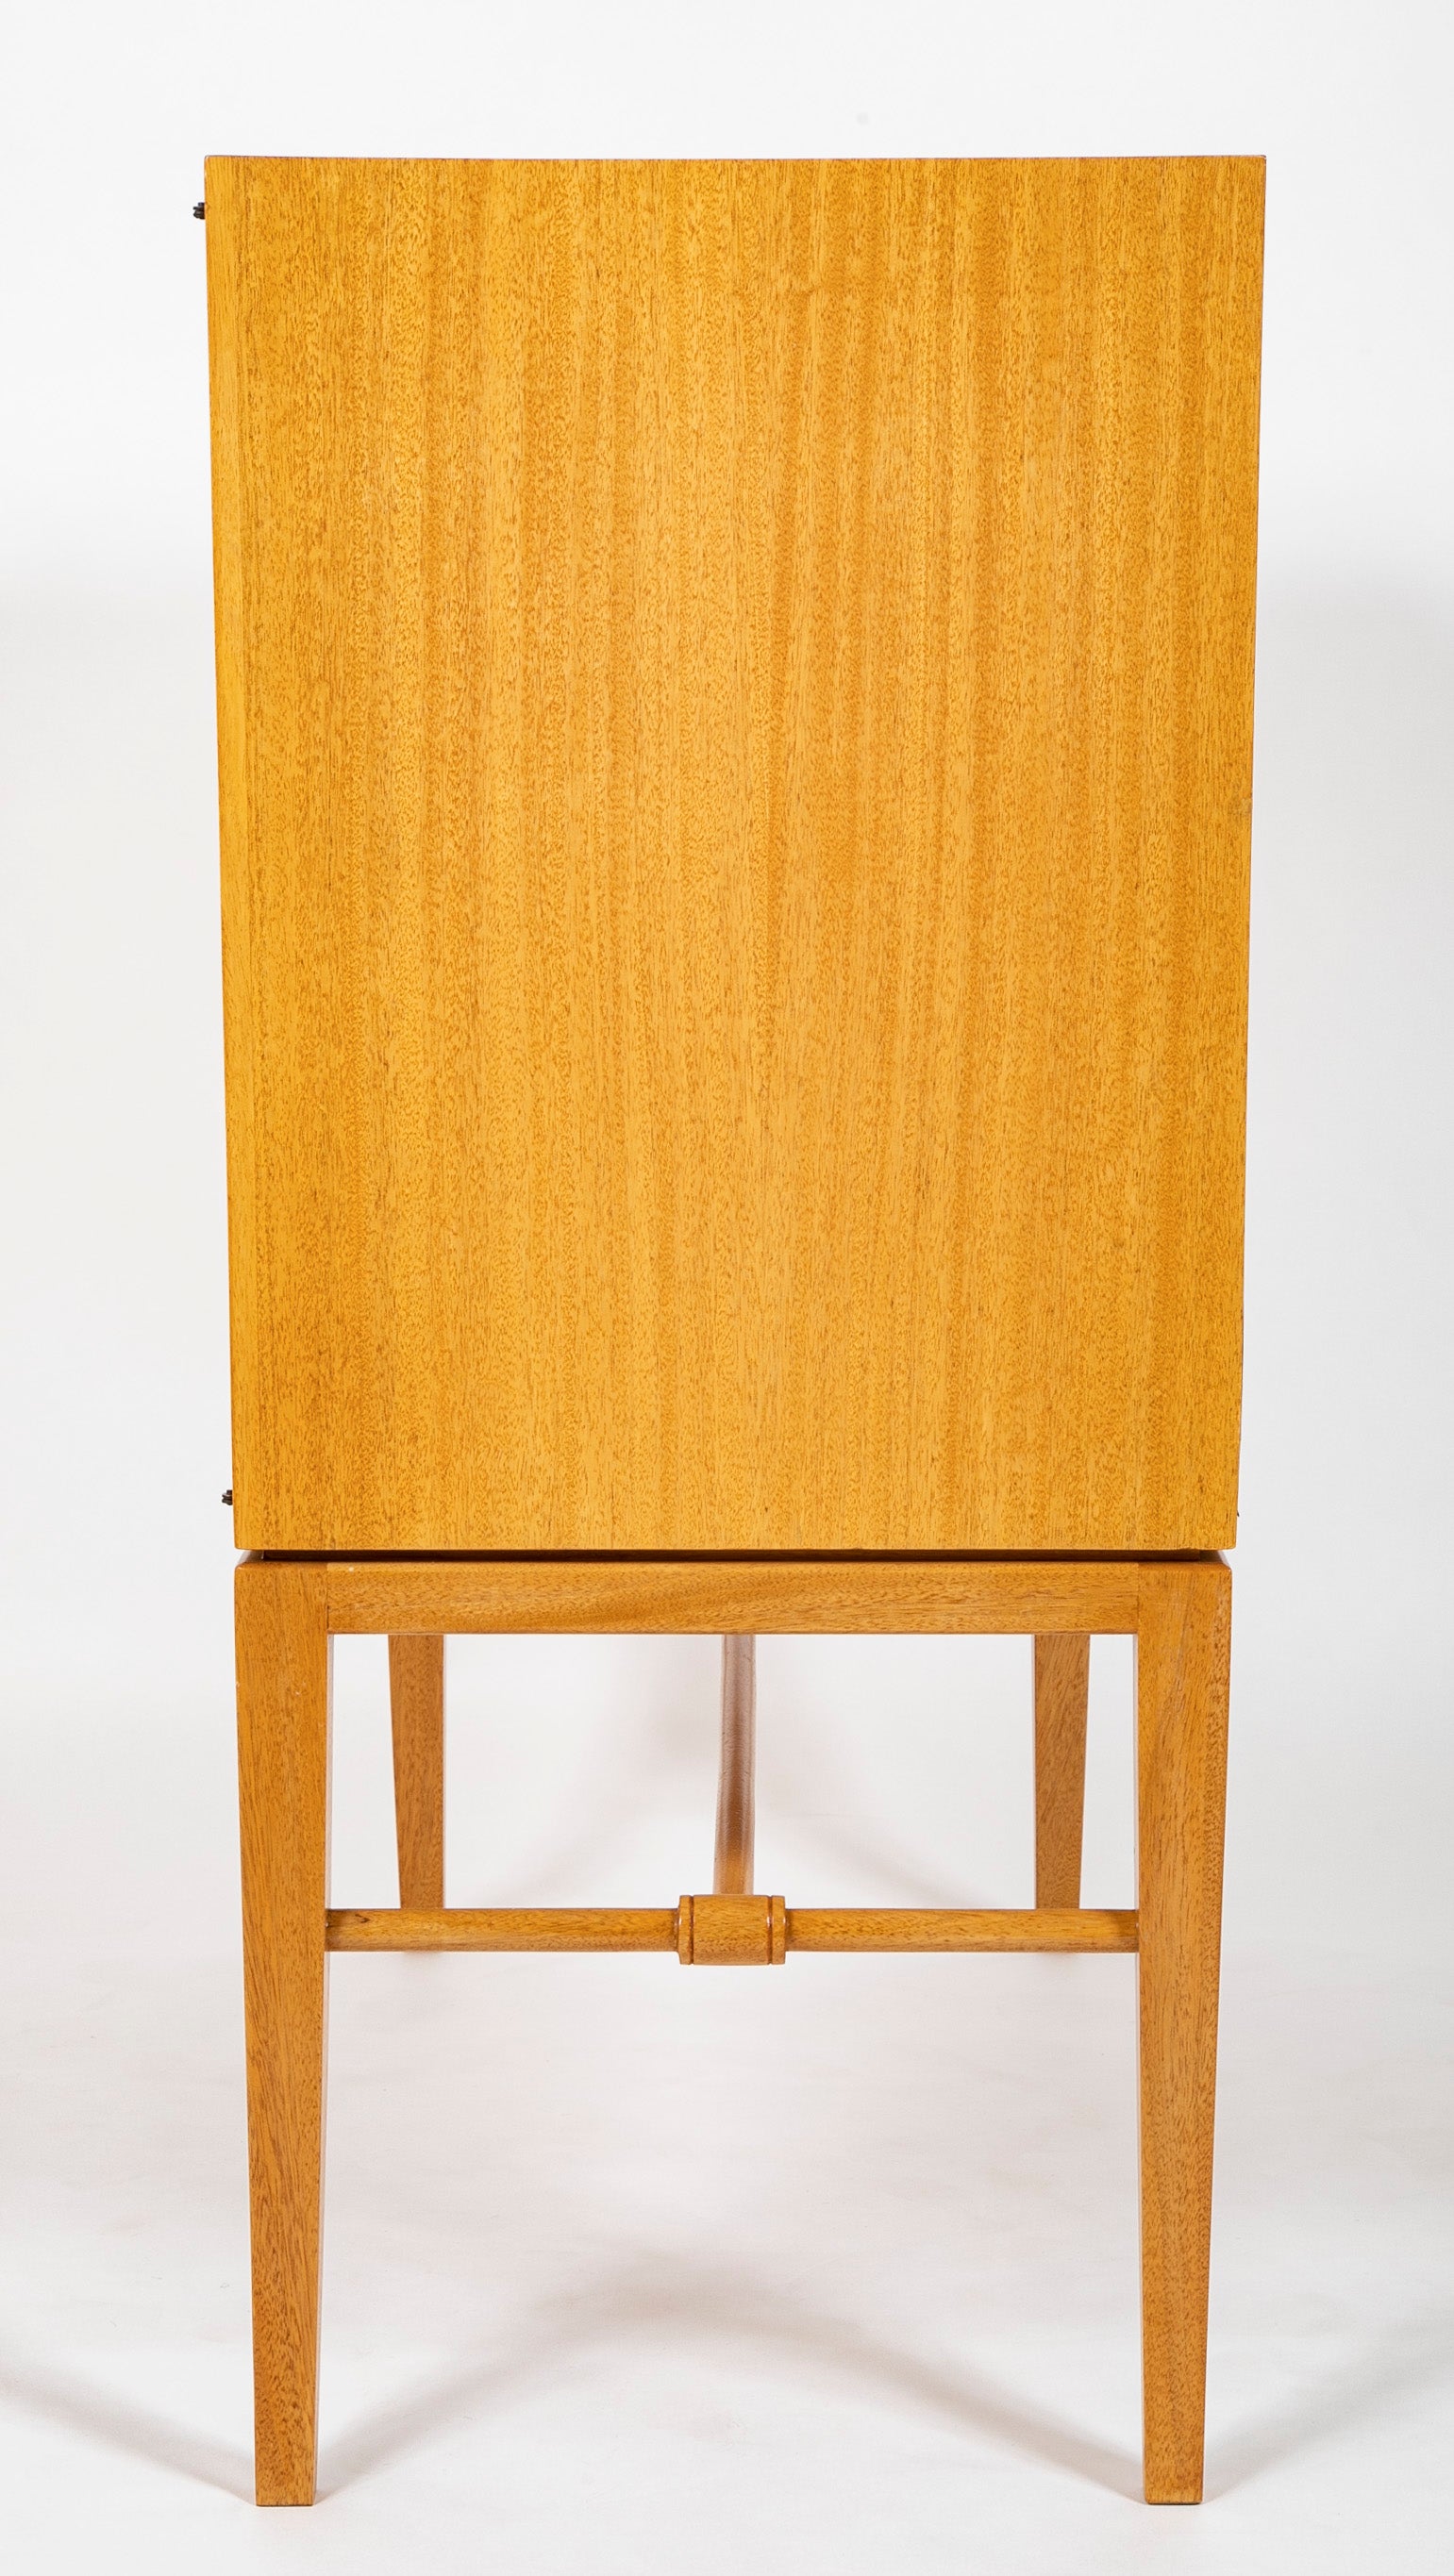 A Tommi Parzinger cabinet with 3 interior drawers